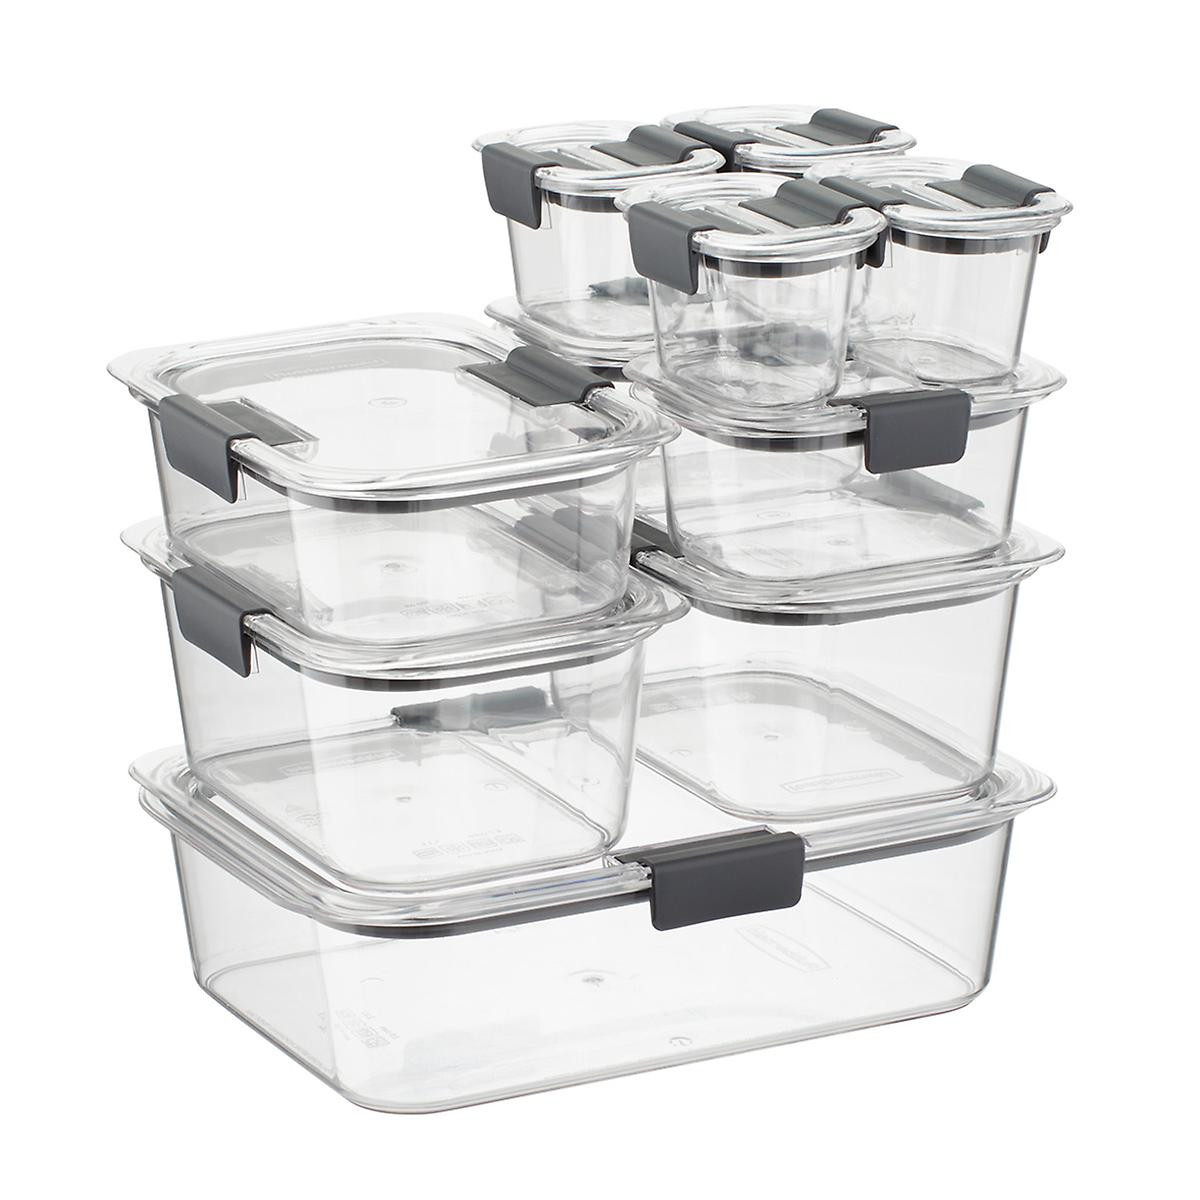 Kitchen Storage Container Sets
 Rubbermaid Brilliance Food Storage Containers Set of 20